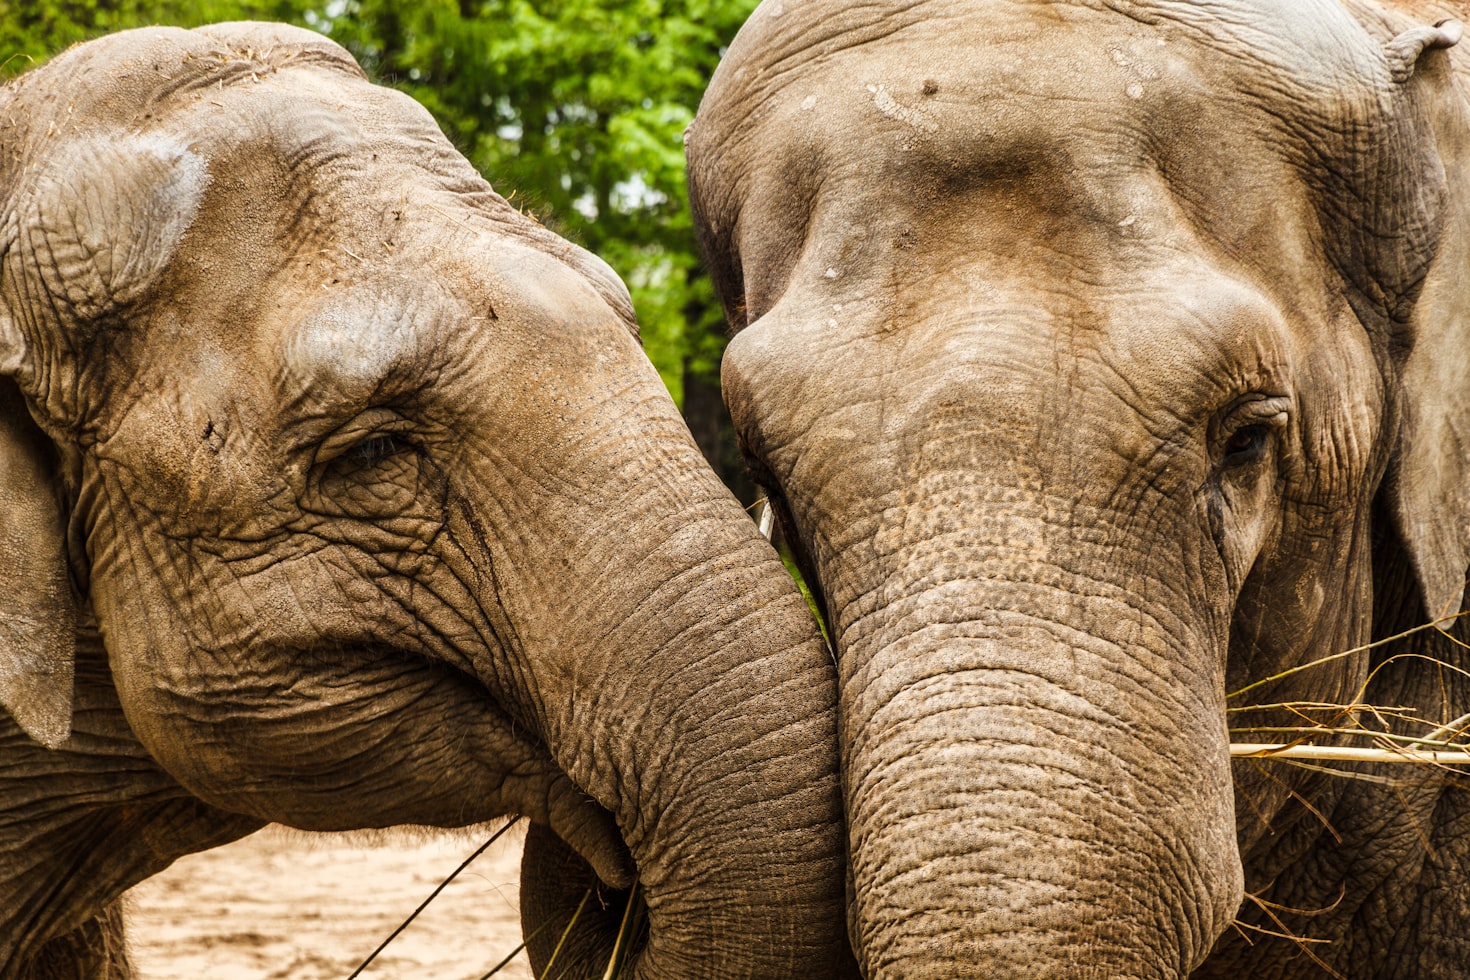 Image is a close up of two elephant faces nuzzling.